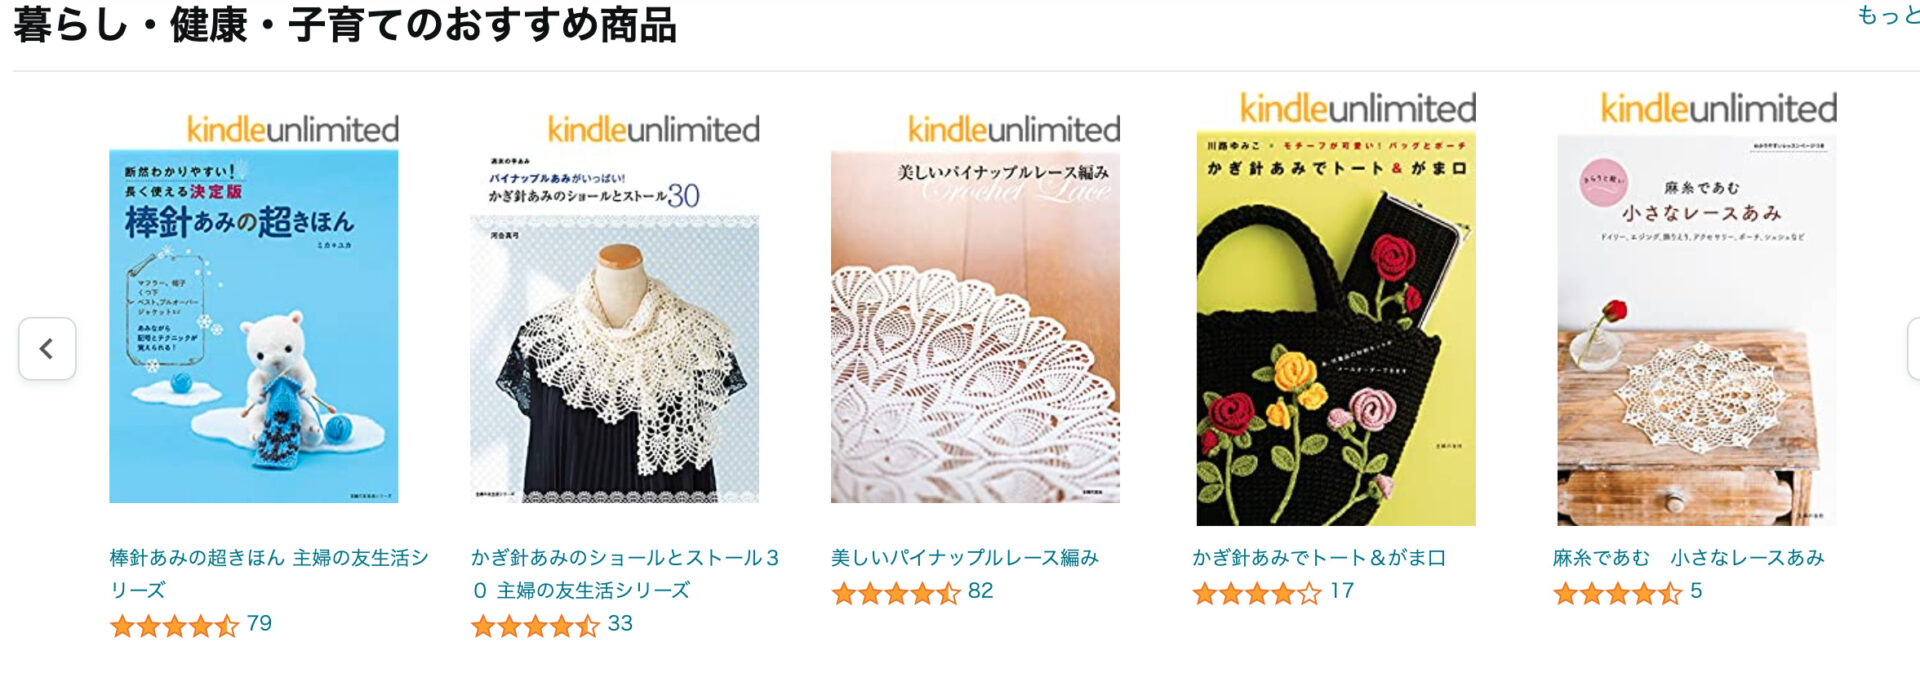 kindle unlimited　編み物本